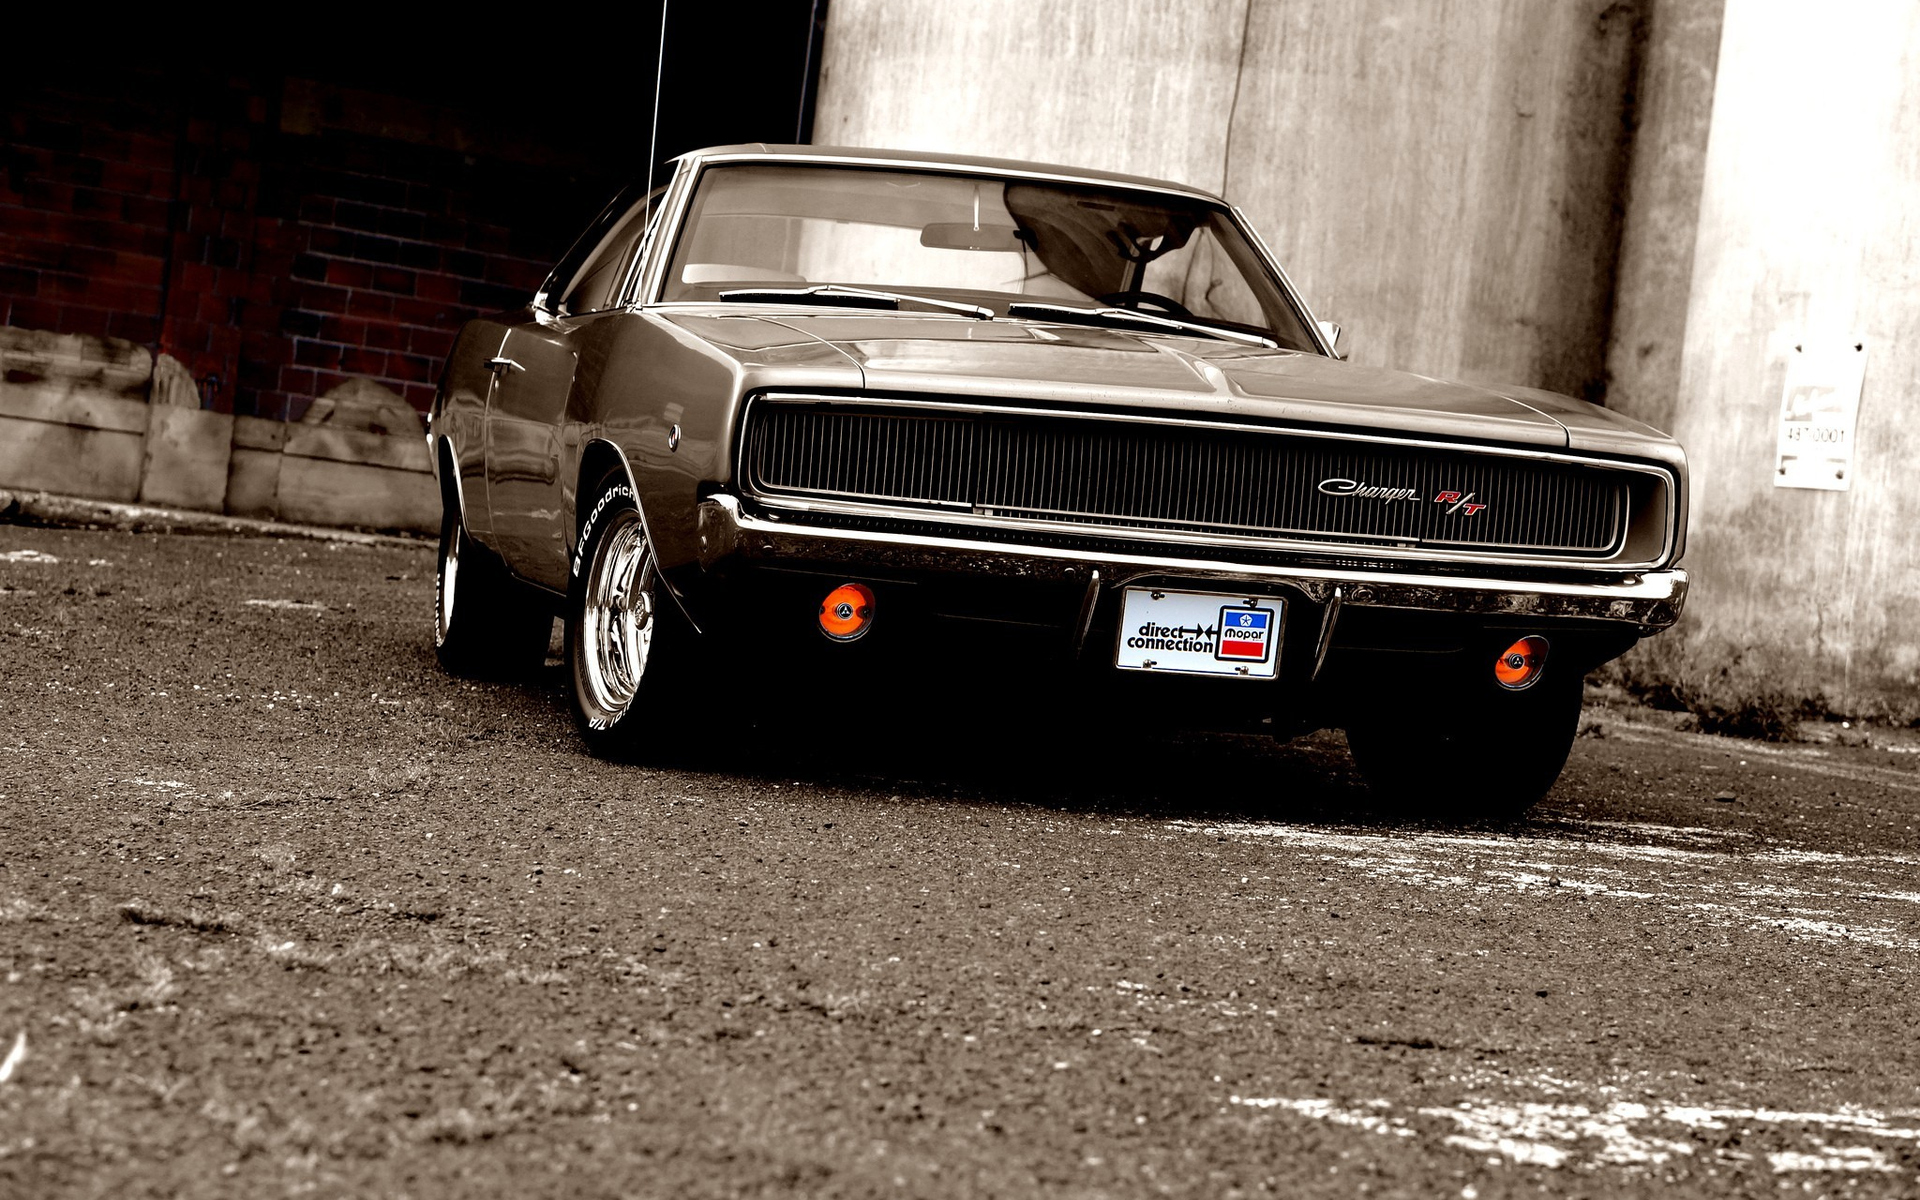 Download 1969 Dodge Charger RT, 1969, Dodge, Charger, RT Wallpaper in  1920x1200 Resolution